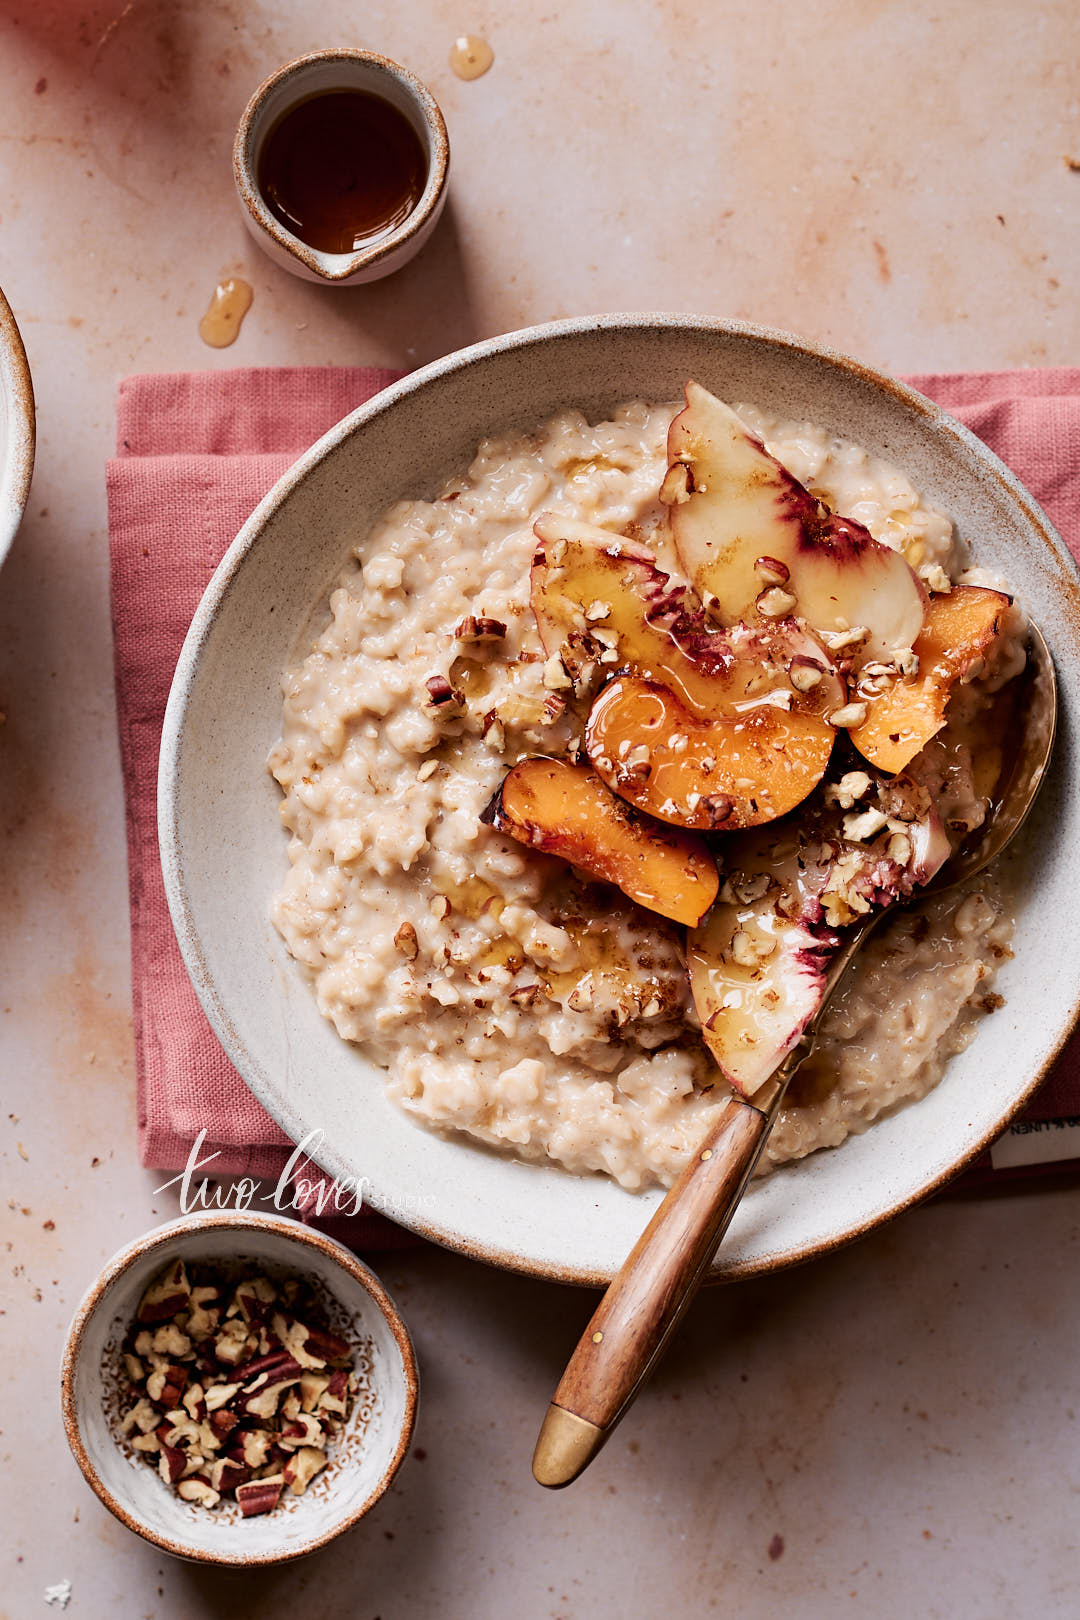 Fresh bowl of oatmeal with nectarines, plums and maple syrup.